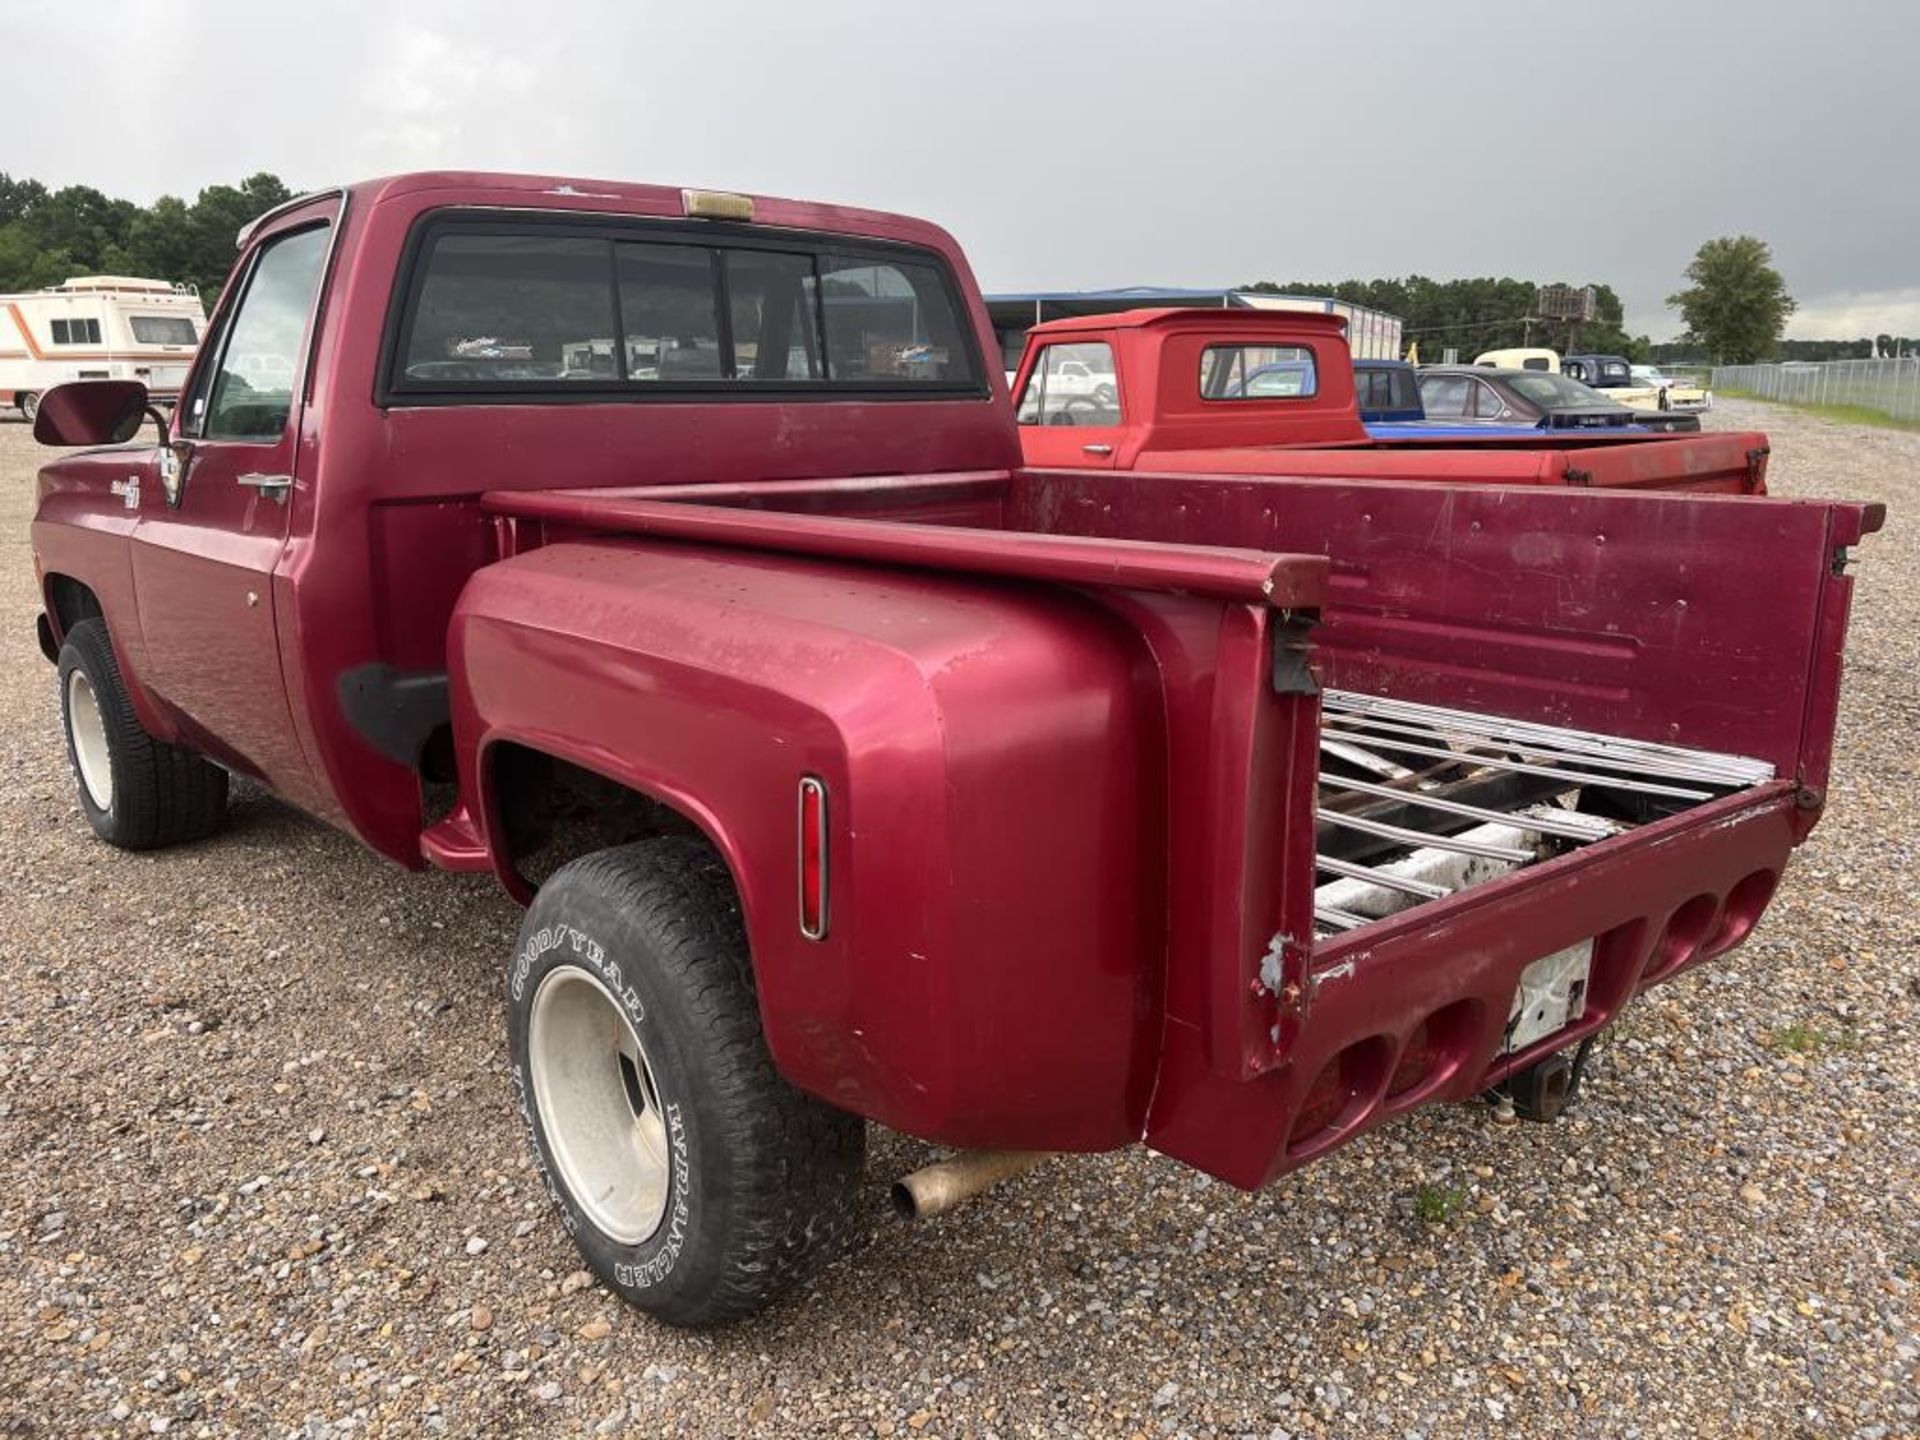 PROJECT: 1978 Chevrolet C10 Pickup - Image 4 of 28